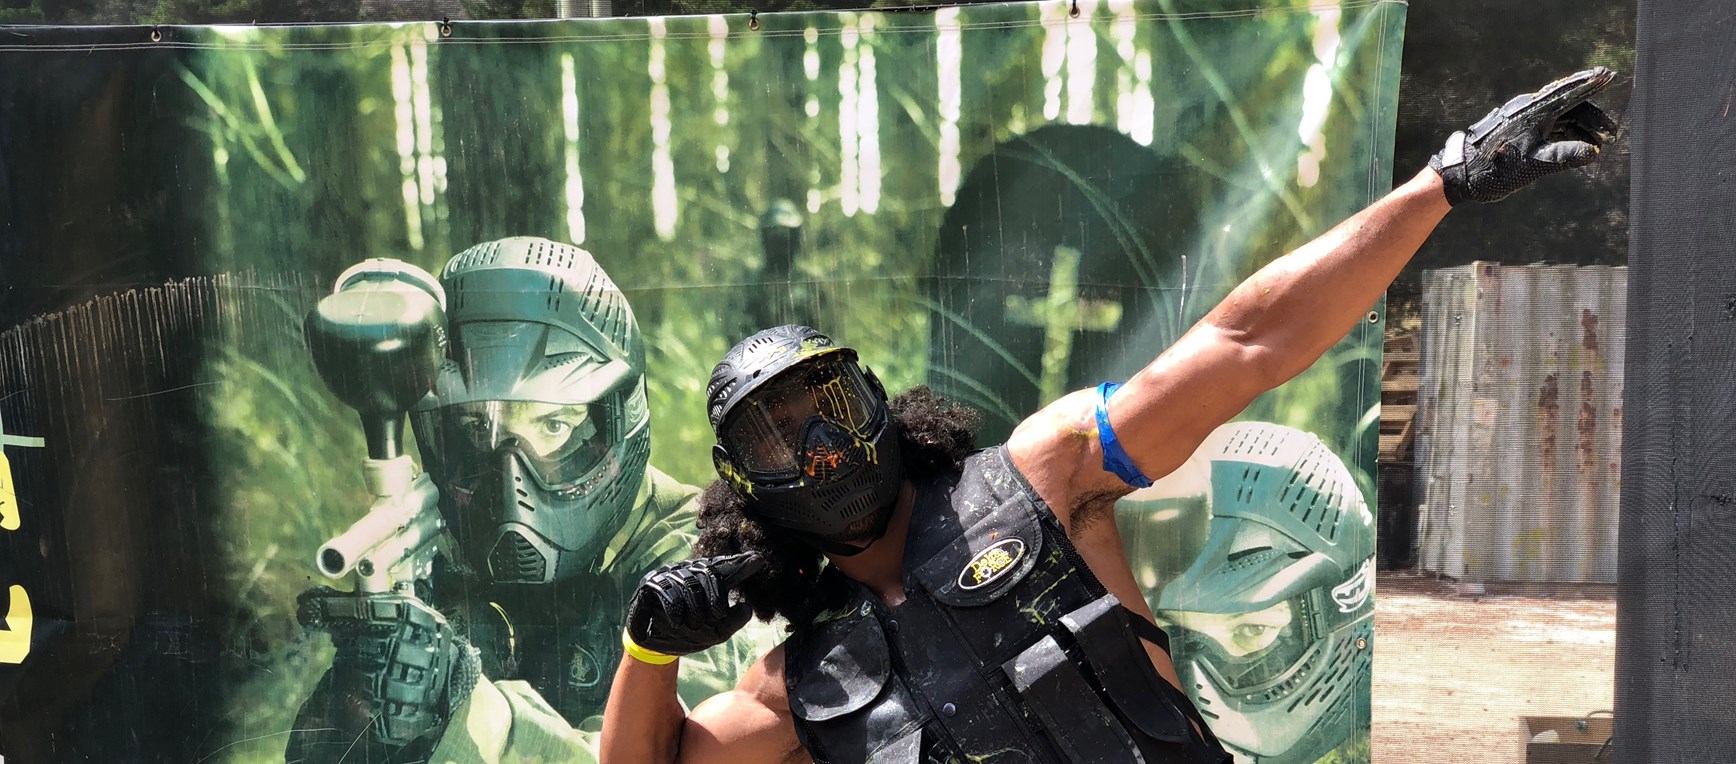 Gallery: Raiders at Delta Force Paintball